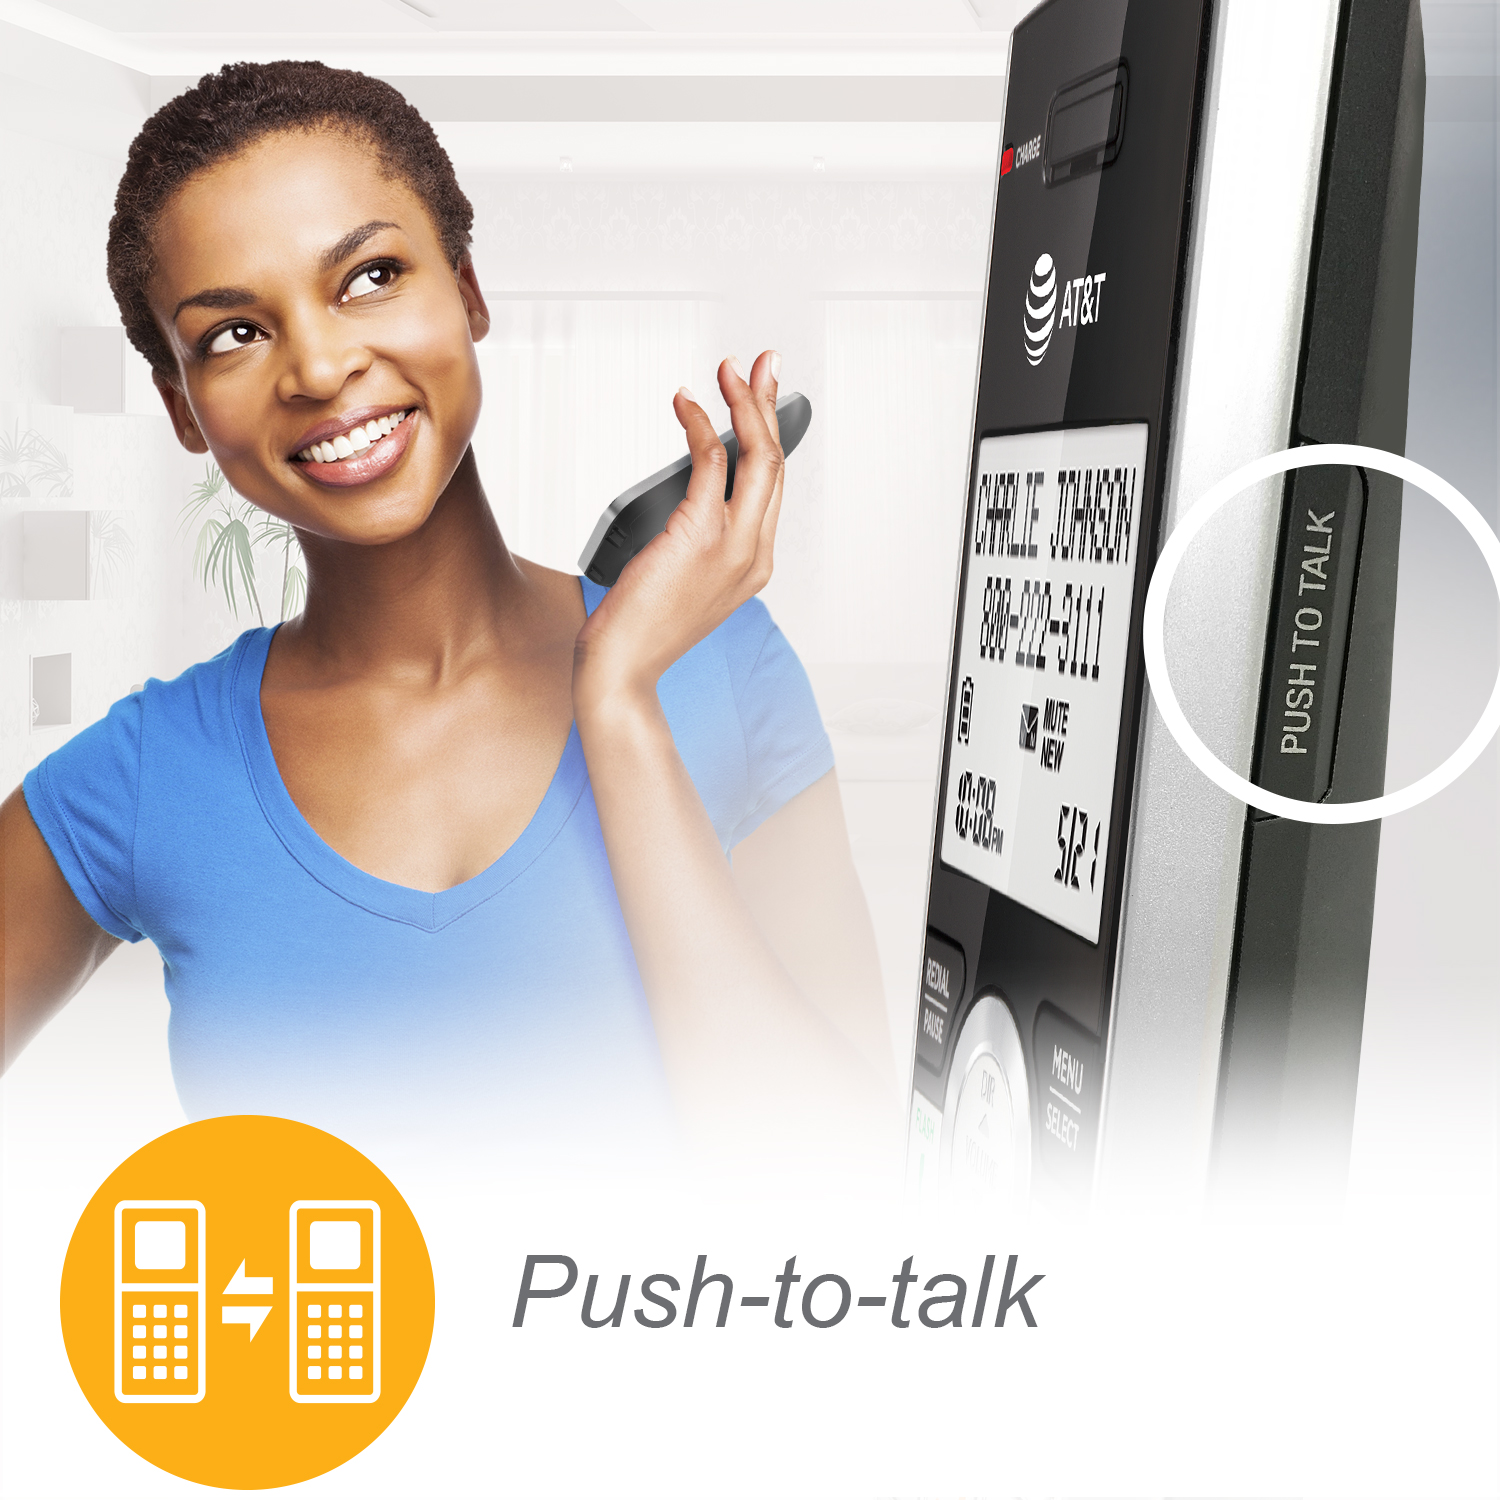 6 handset phone system with smart call blocker - view 11